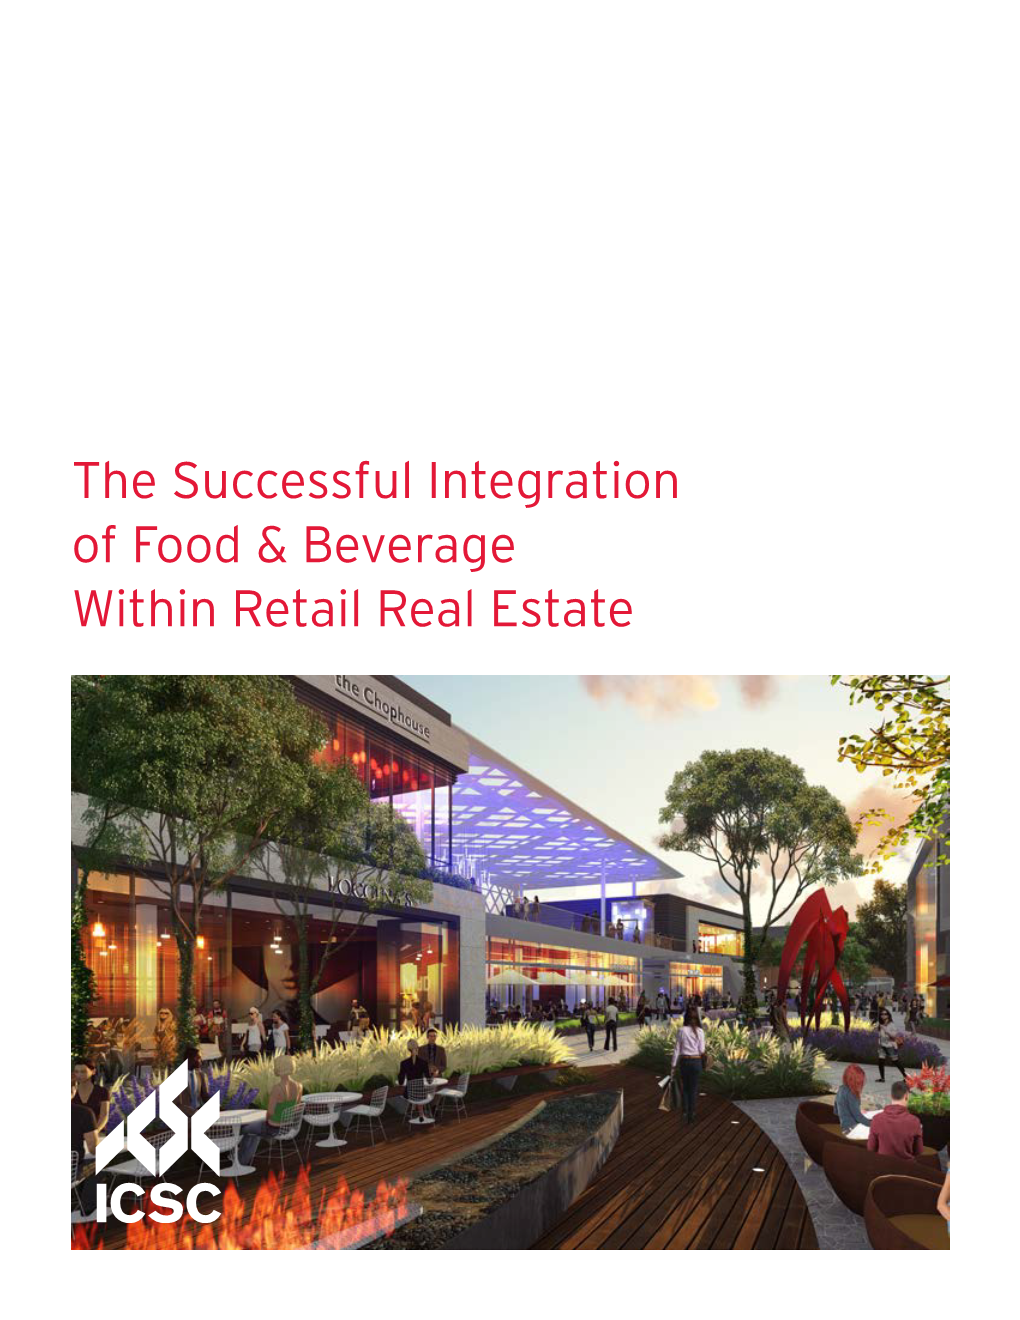 The Successful Integration of Food & Beverage Within Retail Real Estate